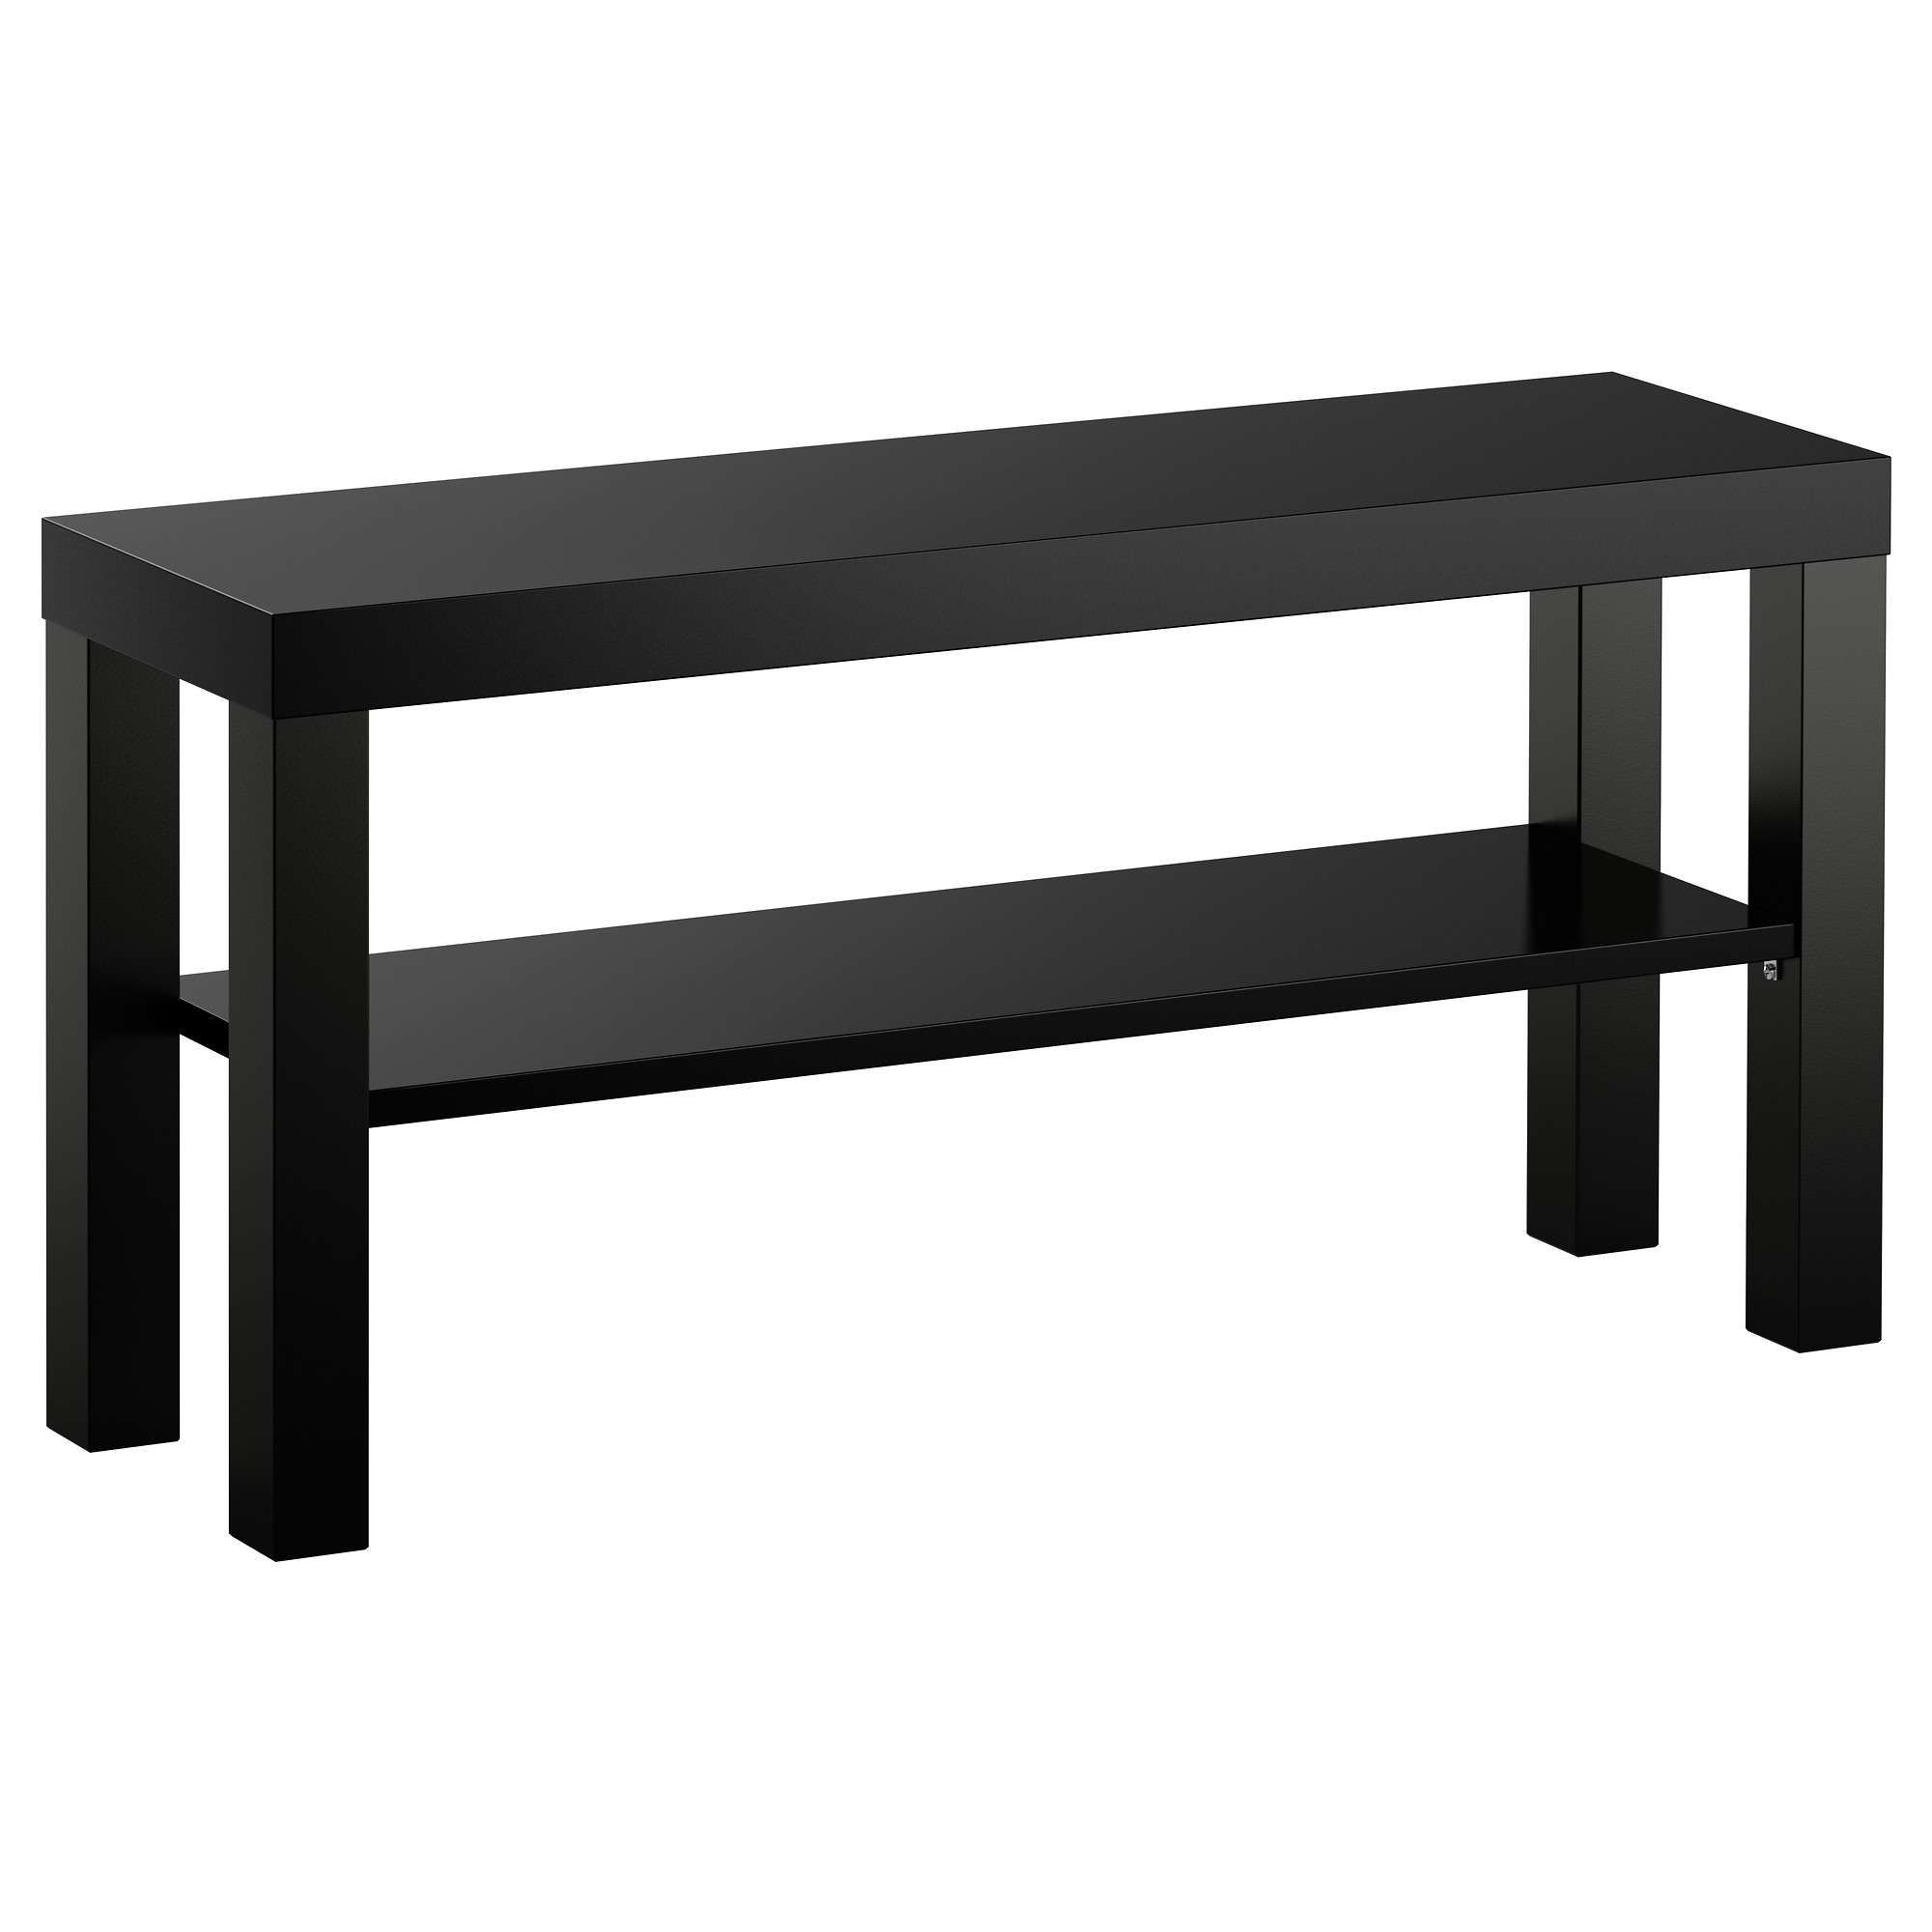 Lack Tv Bench Black 90x26 Cm – Ikea In Bench Tv Stands (View 12 of 15)